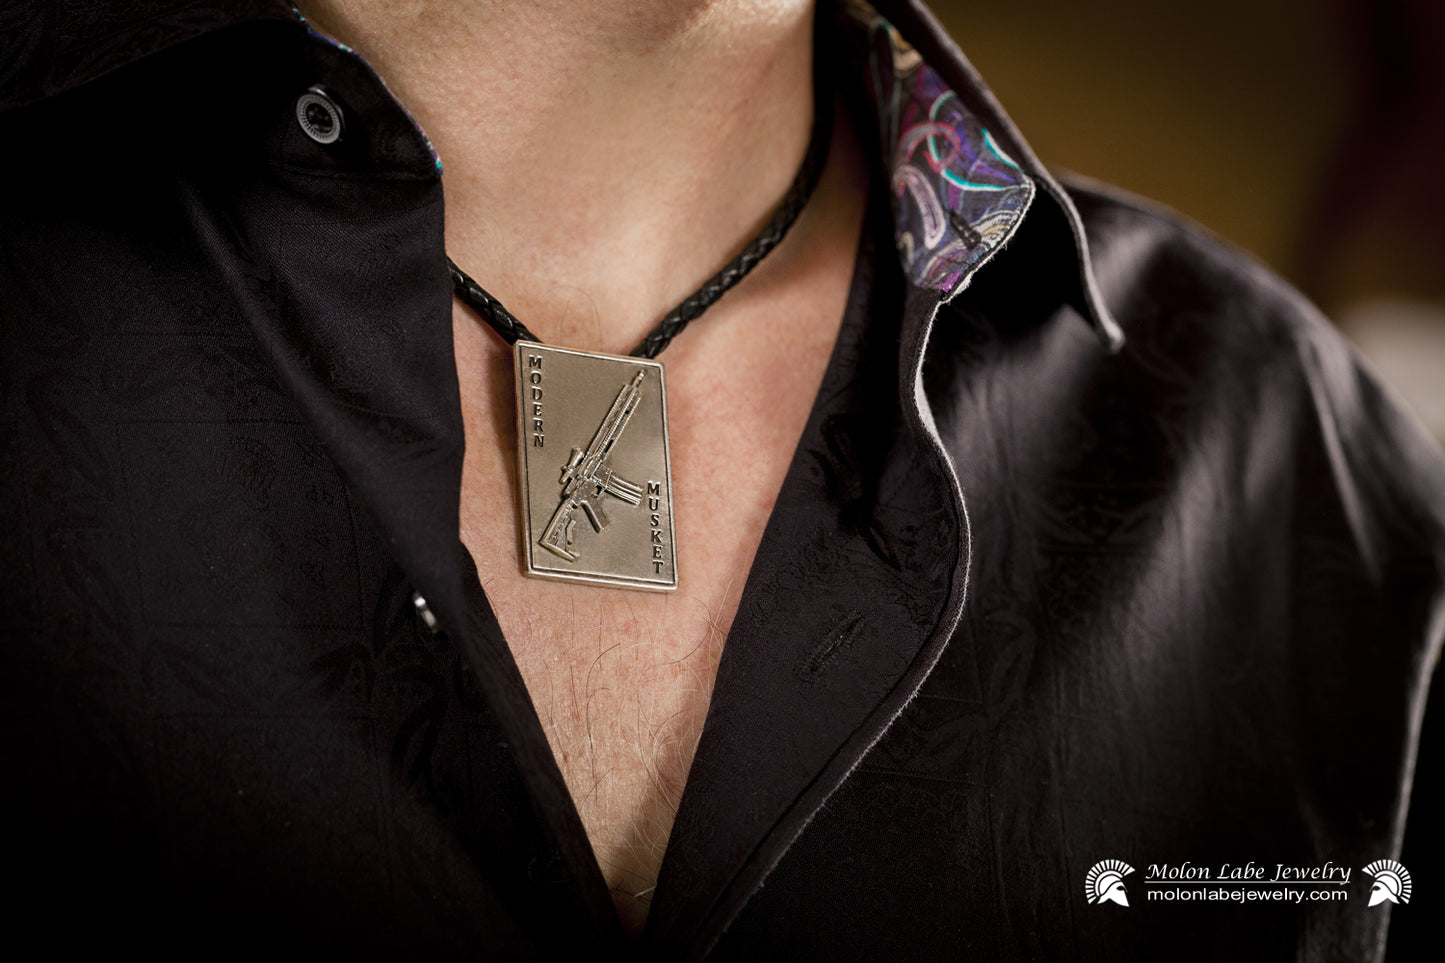 Unisex Sterling Silver AR-15 Riffle and 2nd Amendment Pendant with Leather Bolo Cord Necklace on male model